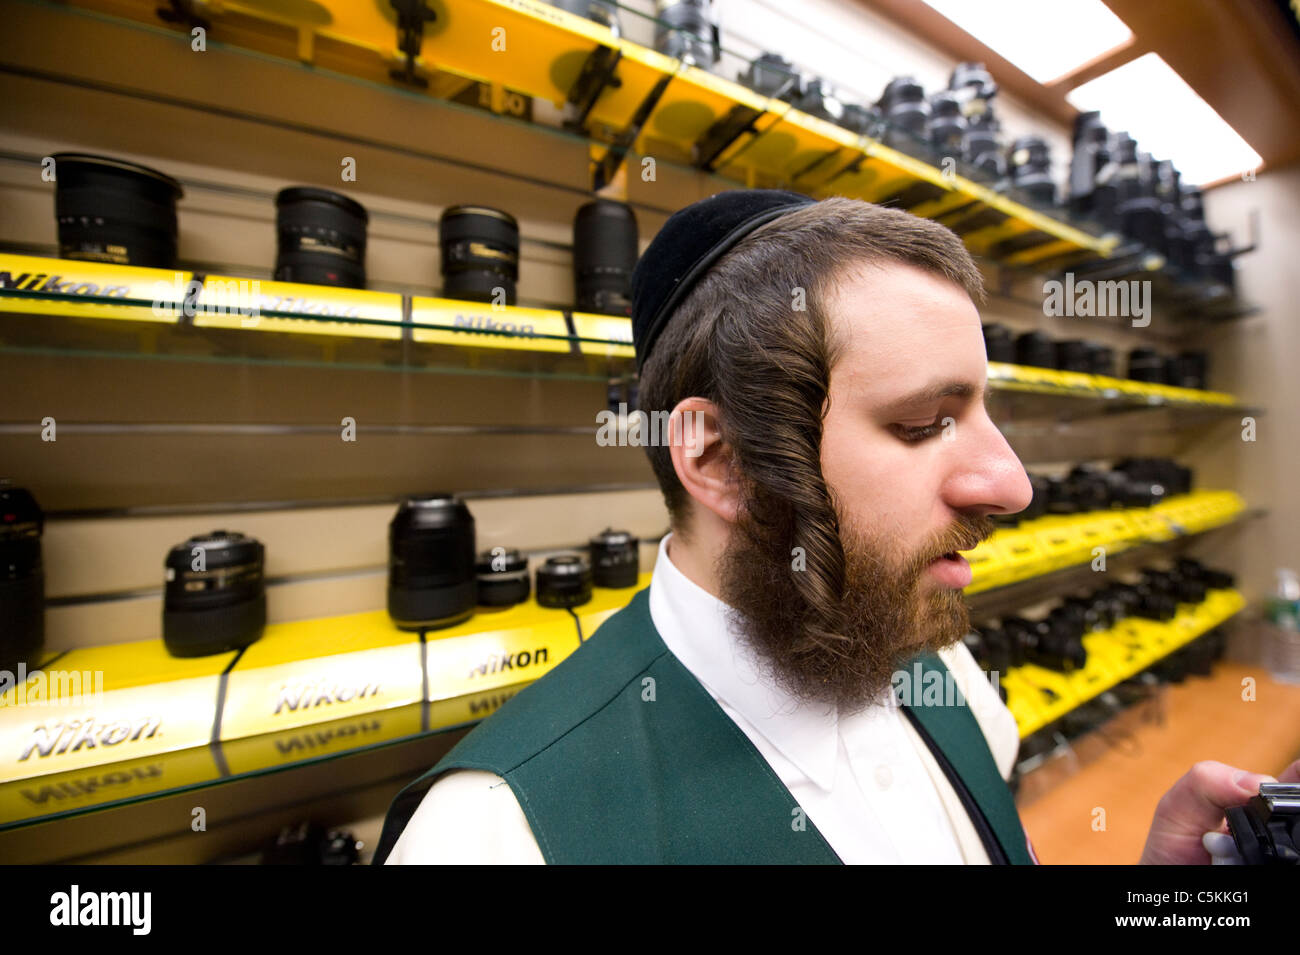 Jewish man in front of a Nikon lens display in a camera store, New York City. © Craig M. Eisenberg Stock Photo